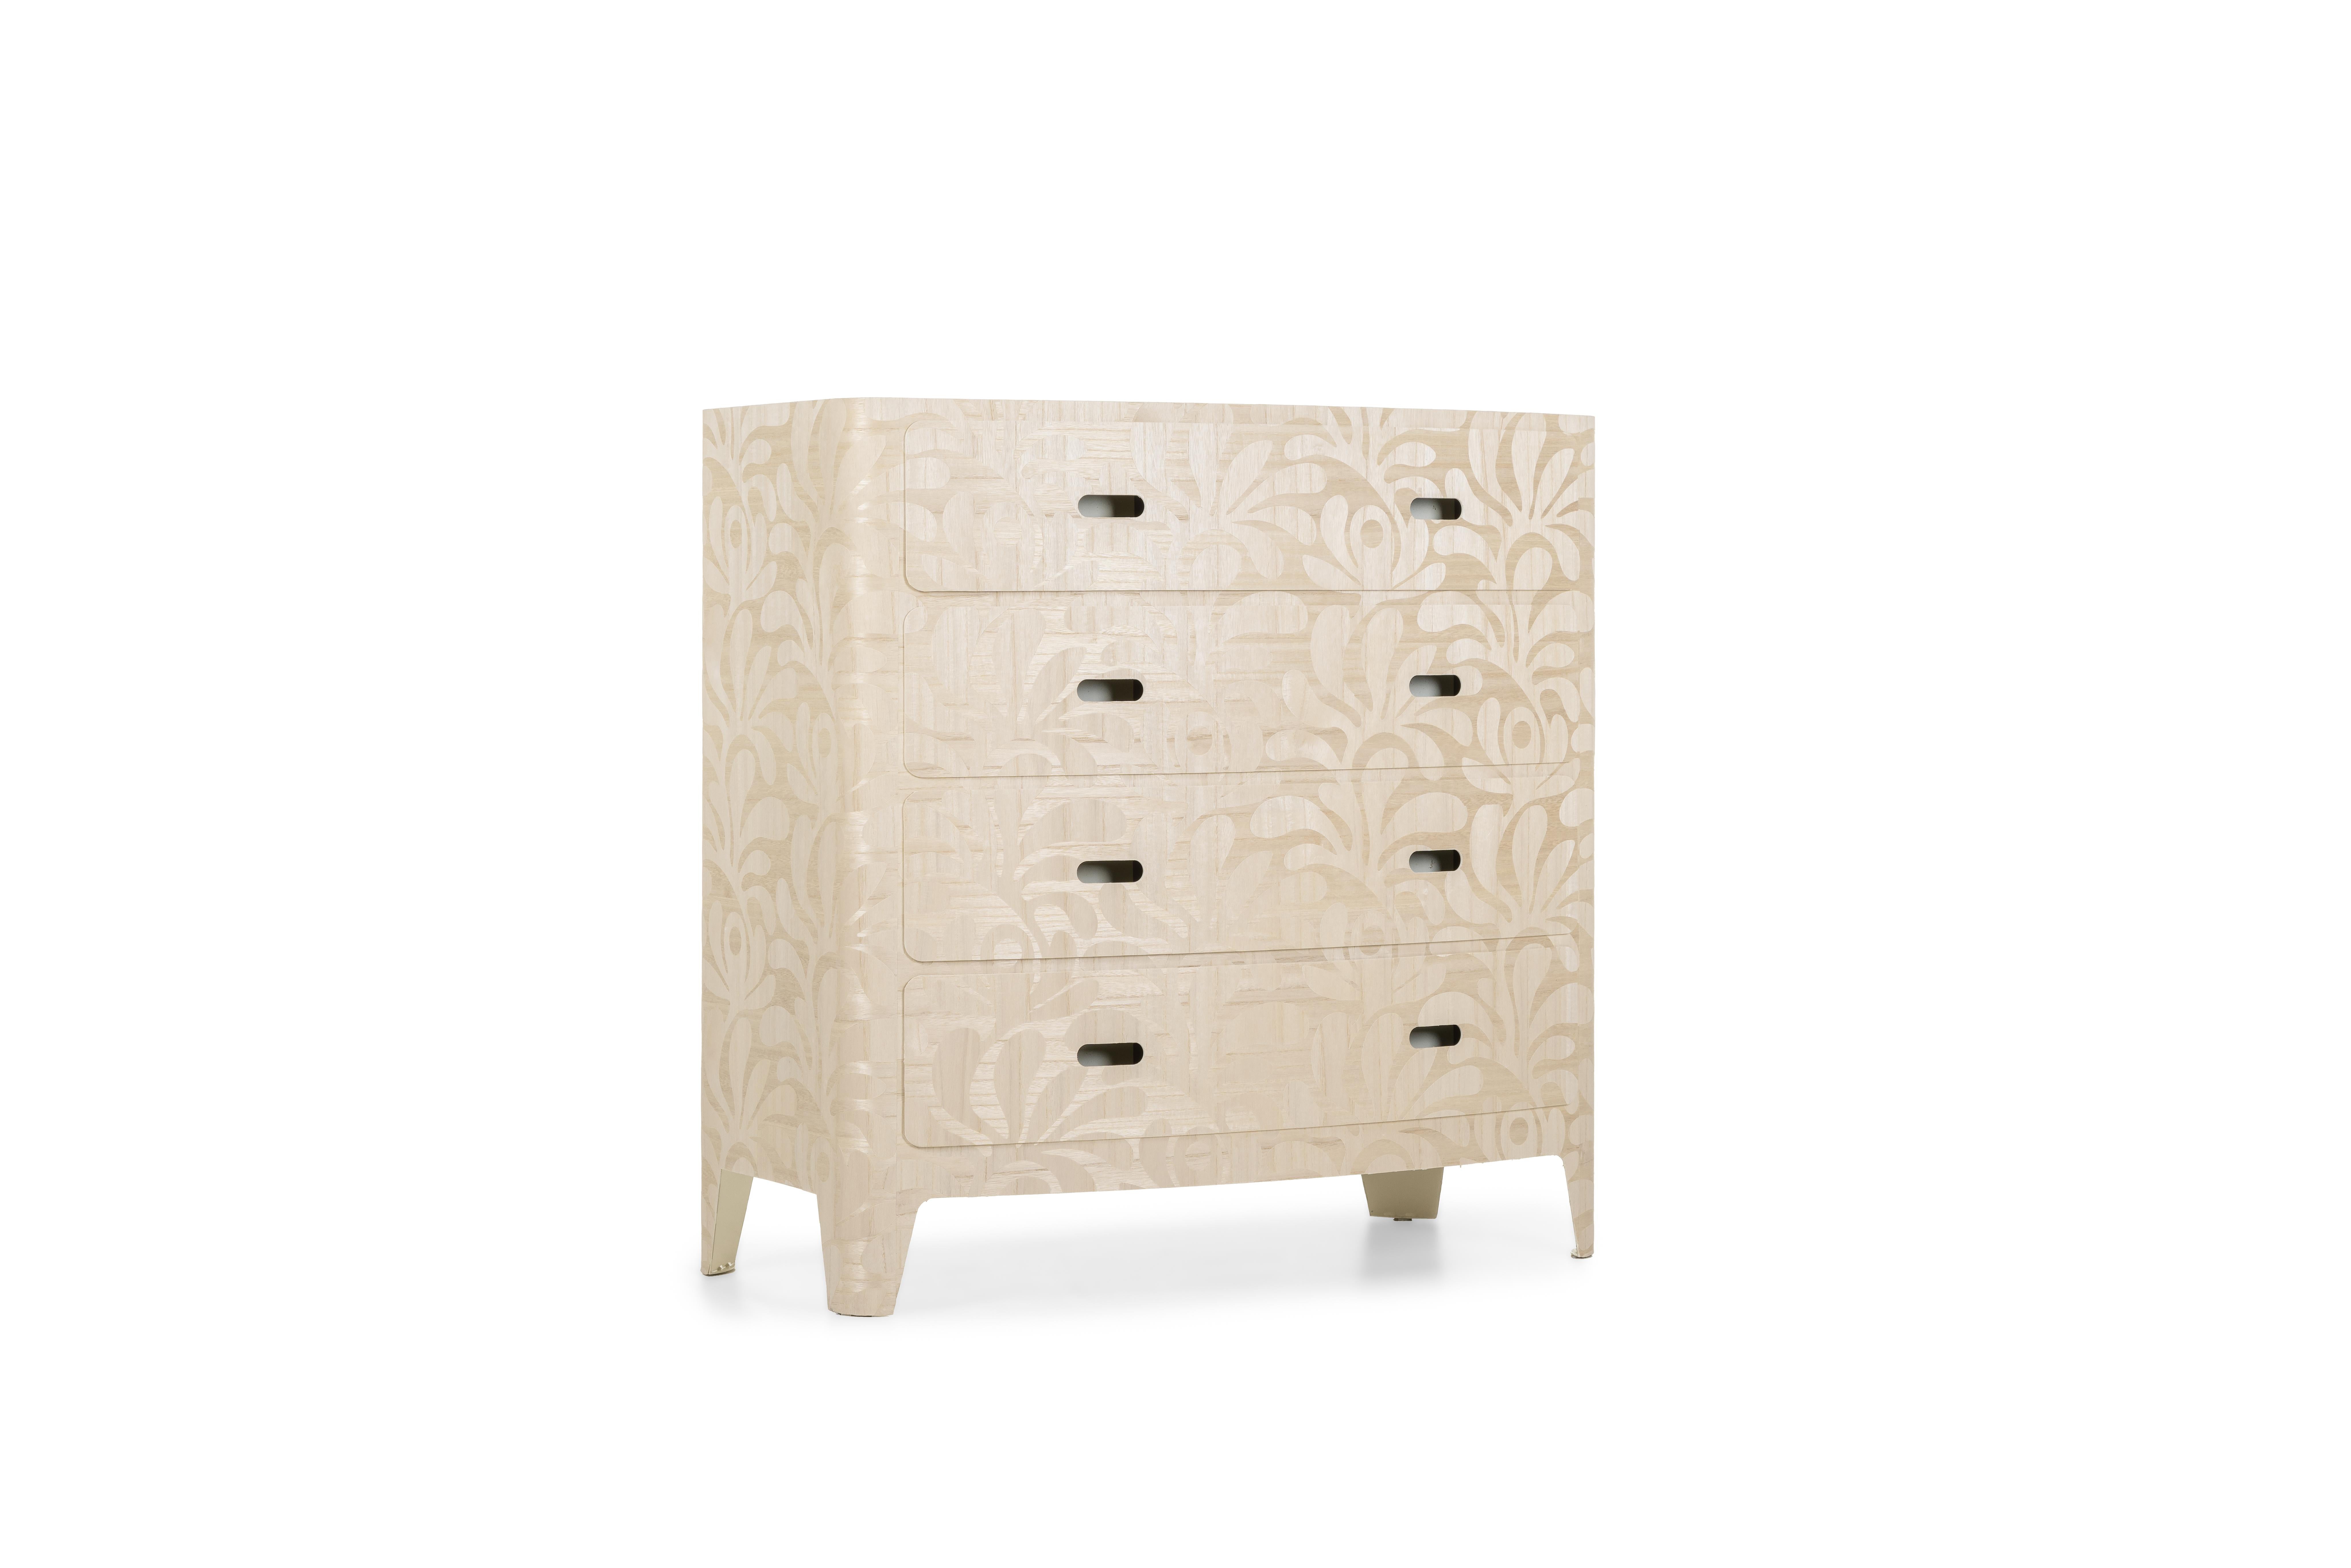 Elevate your space with the Eek Dresser - a fusion of elegance, rarity, and the humbling power of nature. This is your invitation to become part of the narrative of creative luxury. The Eek Dresser is a captivating four-drawer dresser that